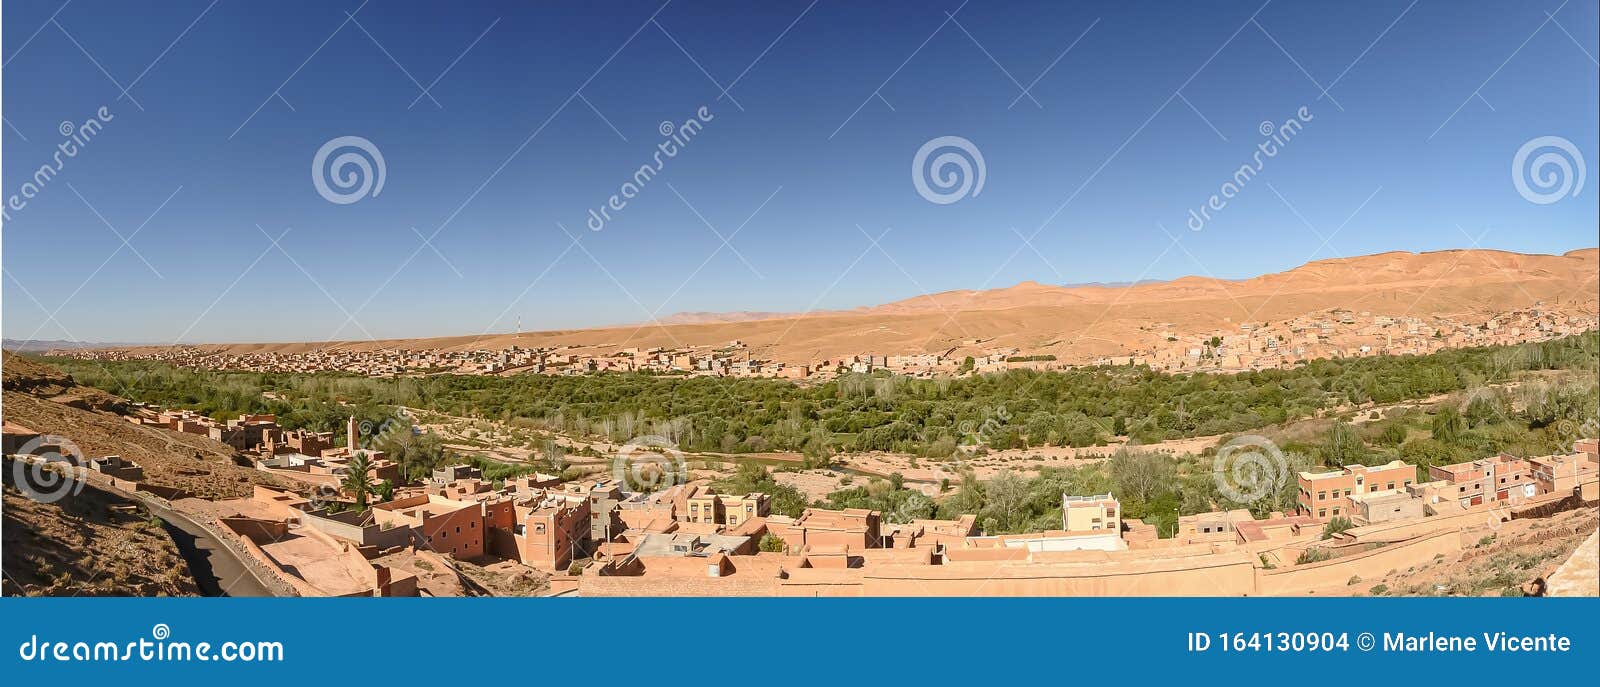 panoramic of the city of boumalne dades, in the province of tinghir, drÃÂ¢a-tafilalet. morocco